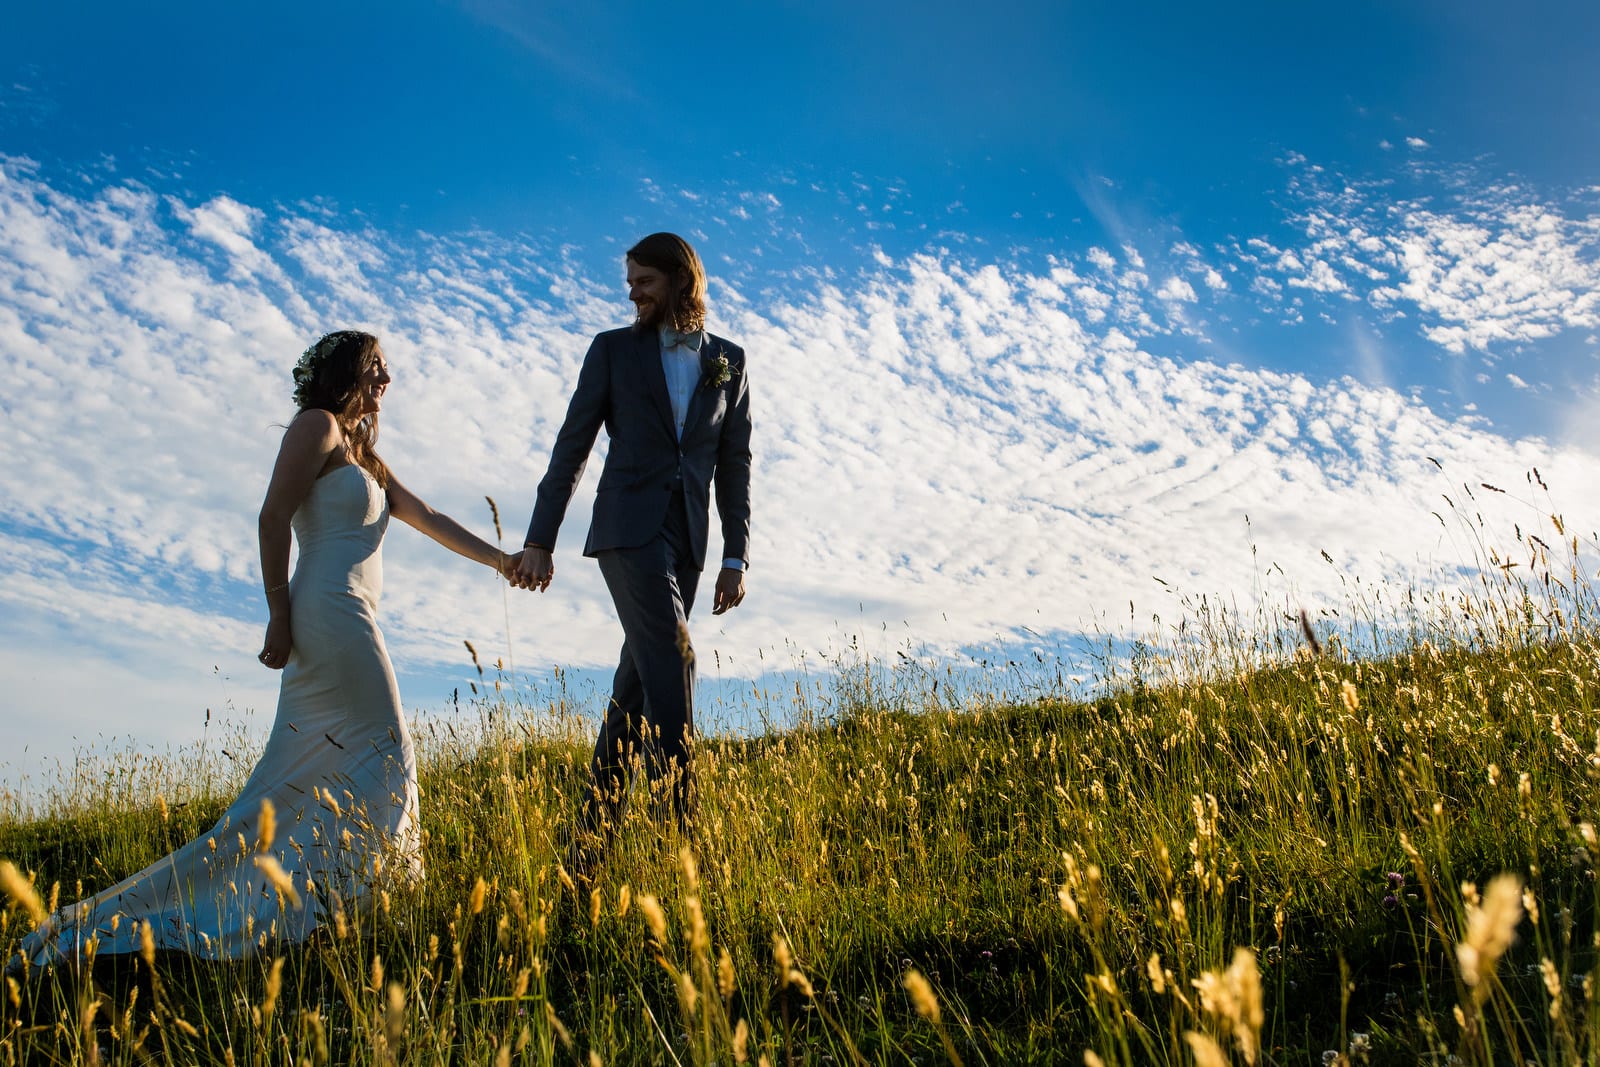 A groom looks back as he leads his bride through a field of tall grass in front of a sky filled with wispy clouds.